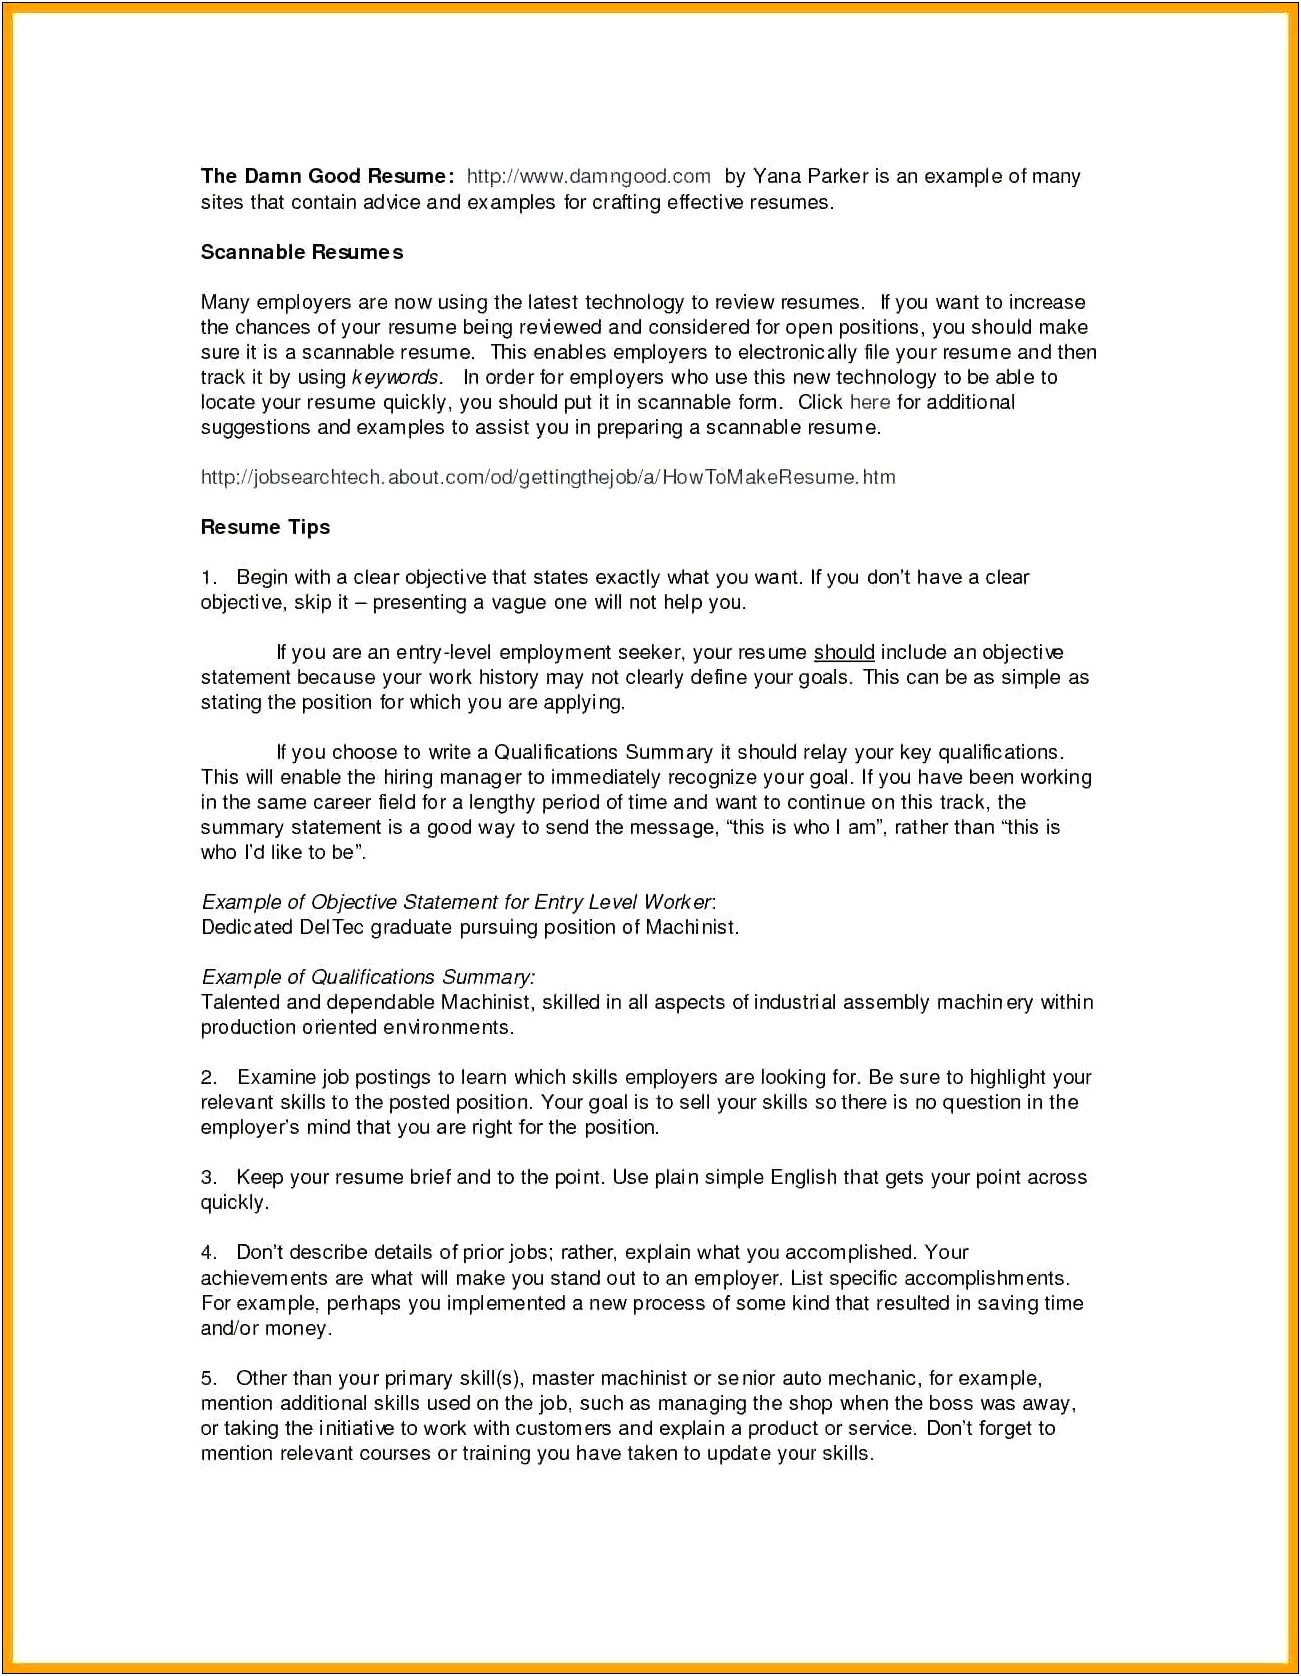 Resume Objective Examples For Entry Level Job Seekers